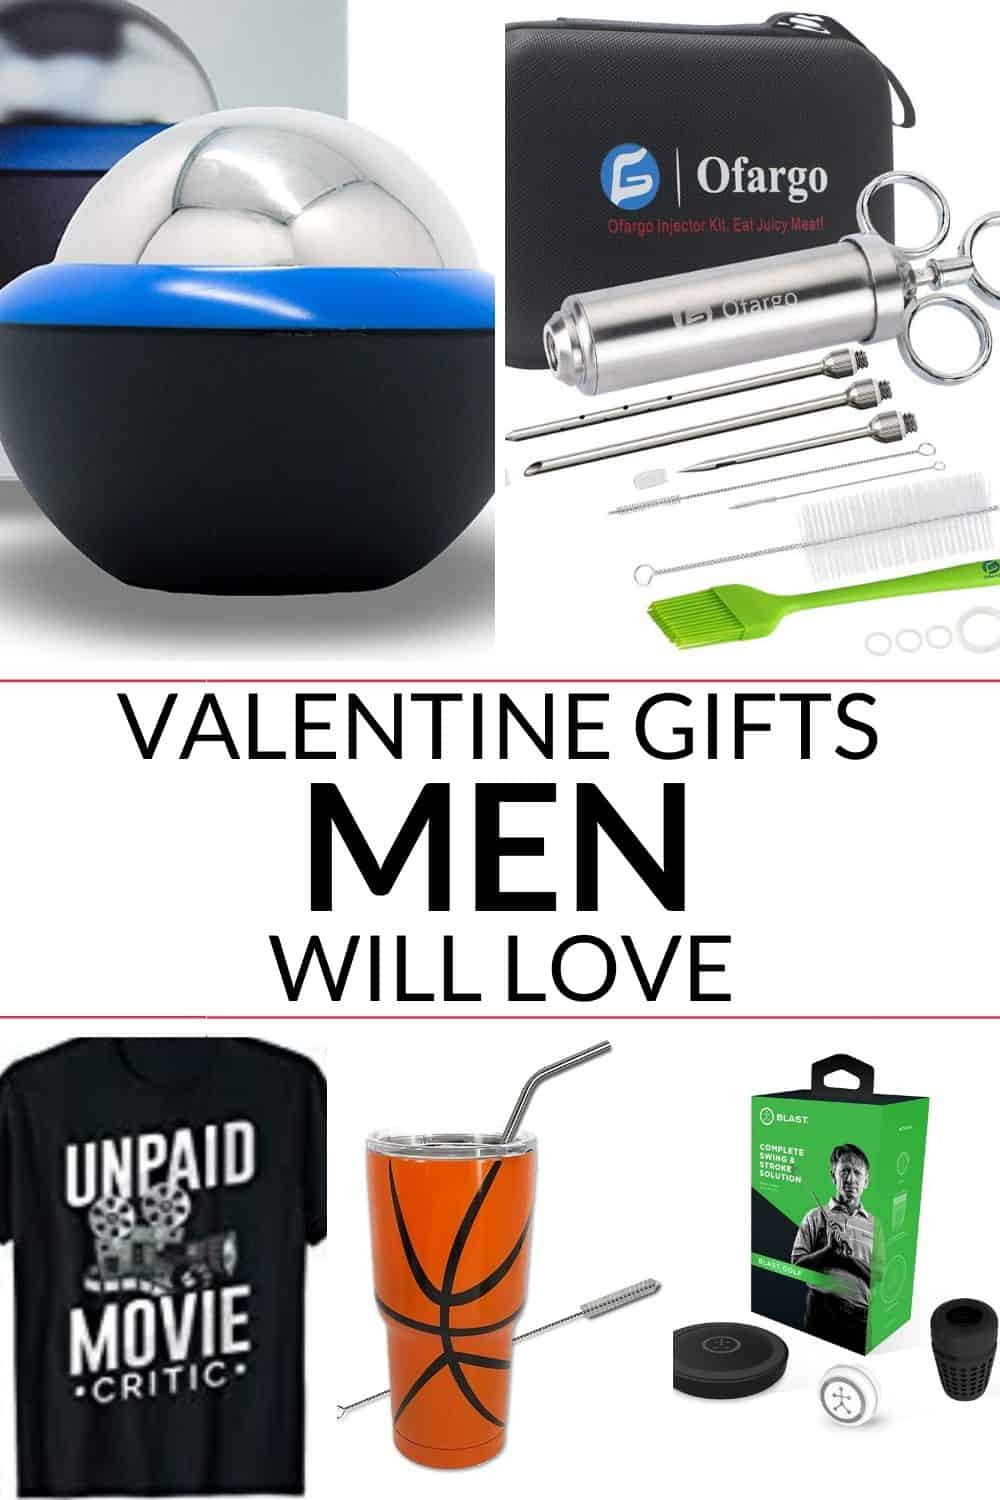 Valentines Gift Ideas For Husbands
 Valentine Gift for Husband Great ideas